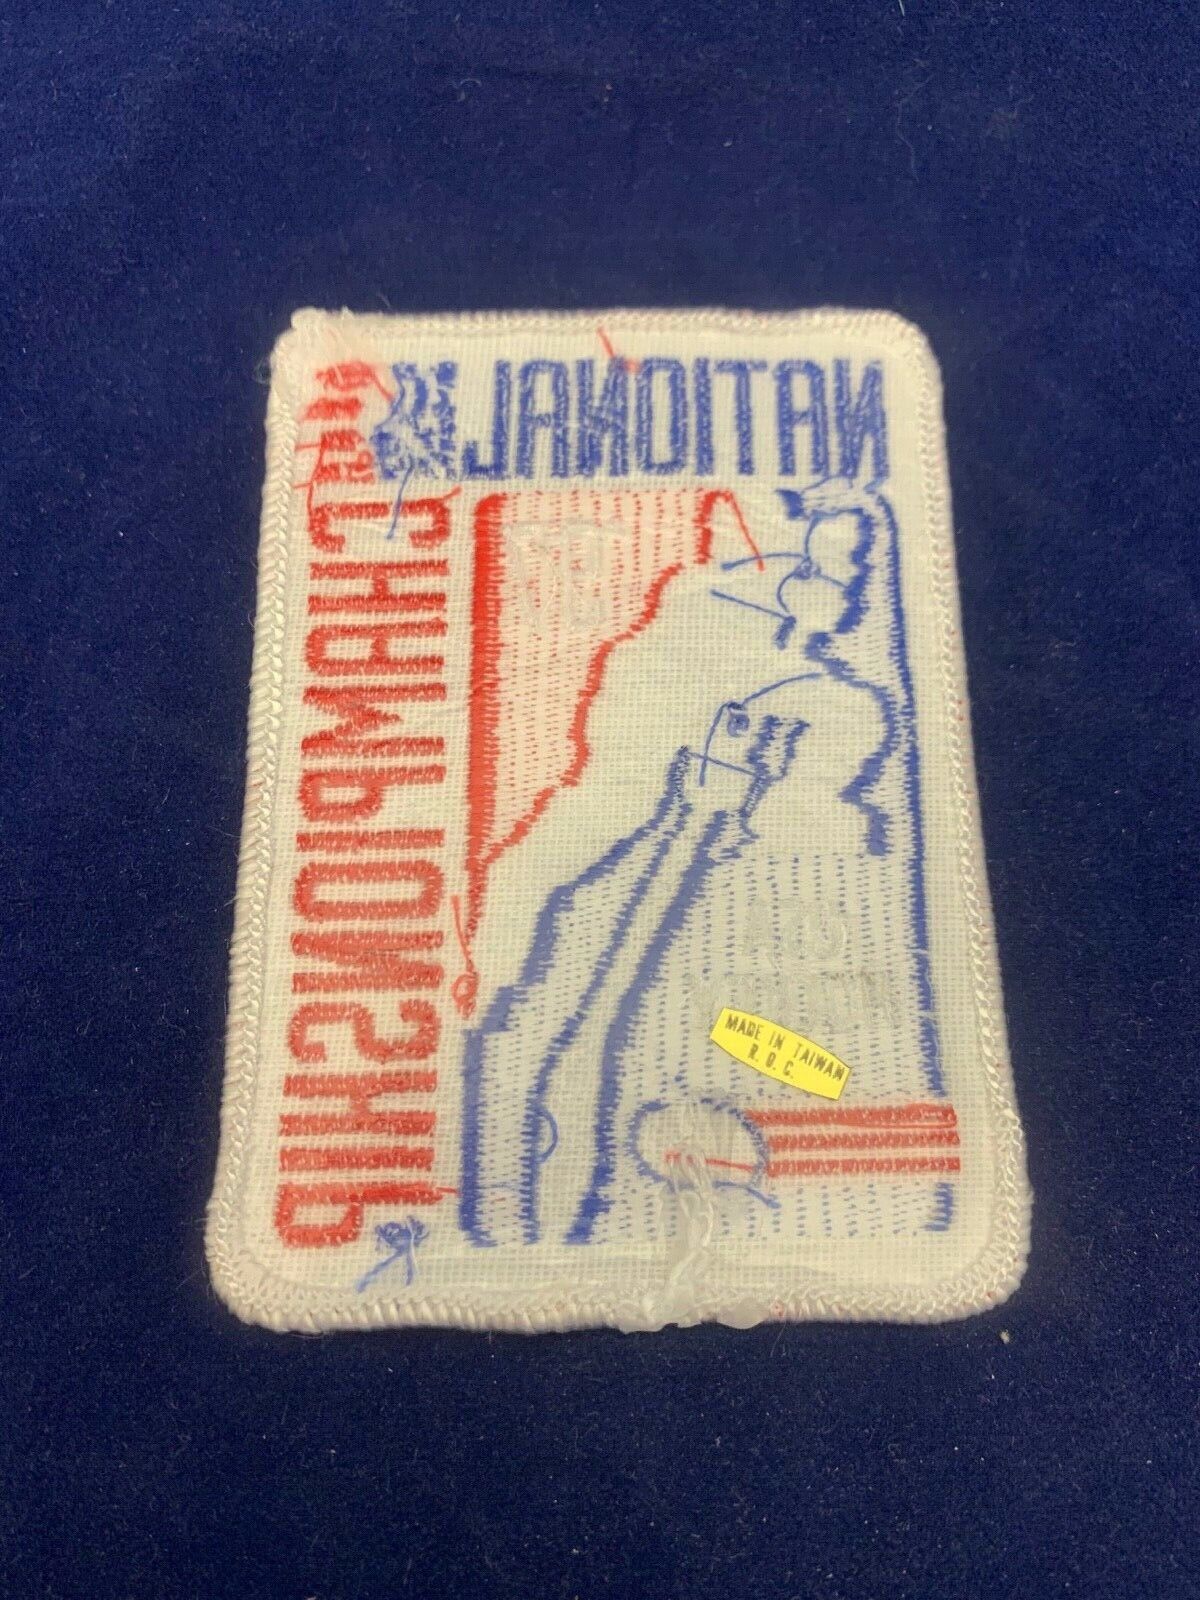 1997 National USA Hockey Championship Patch Size 3 x 4.25 inches